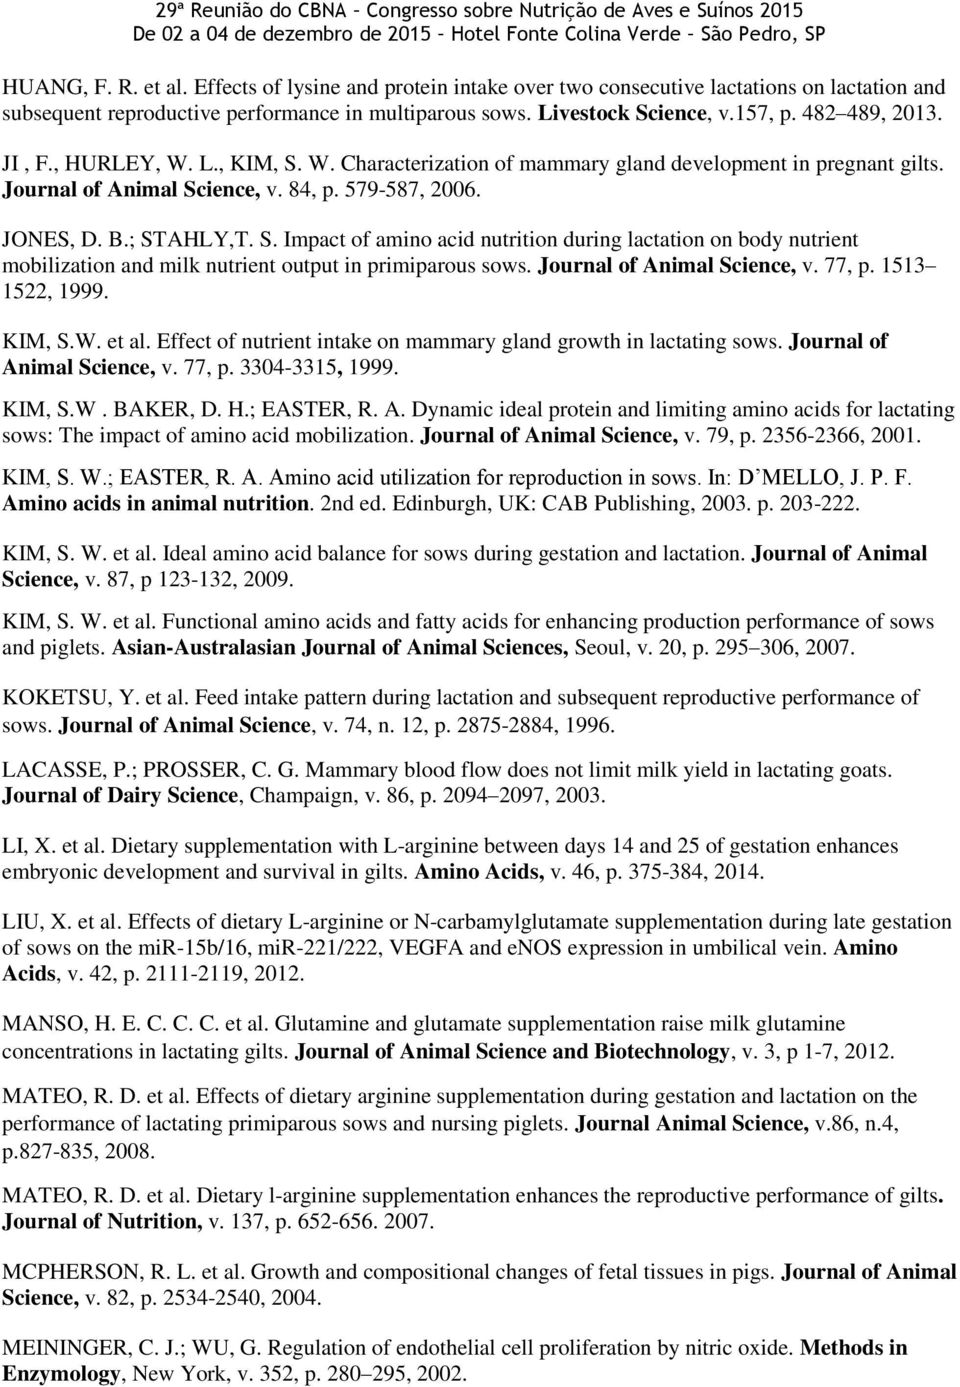 Journal of Animal Science, v. 77, p. 1513 1522, 1999. KIM, S.W. et al. Effect of nutrient intake on mammary gland growth in lactating sows. Journal of Animal Science, v. 77, p. 3304-3315, 1999.